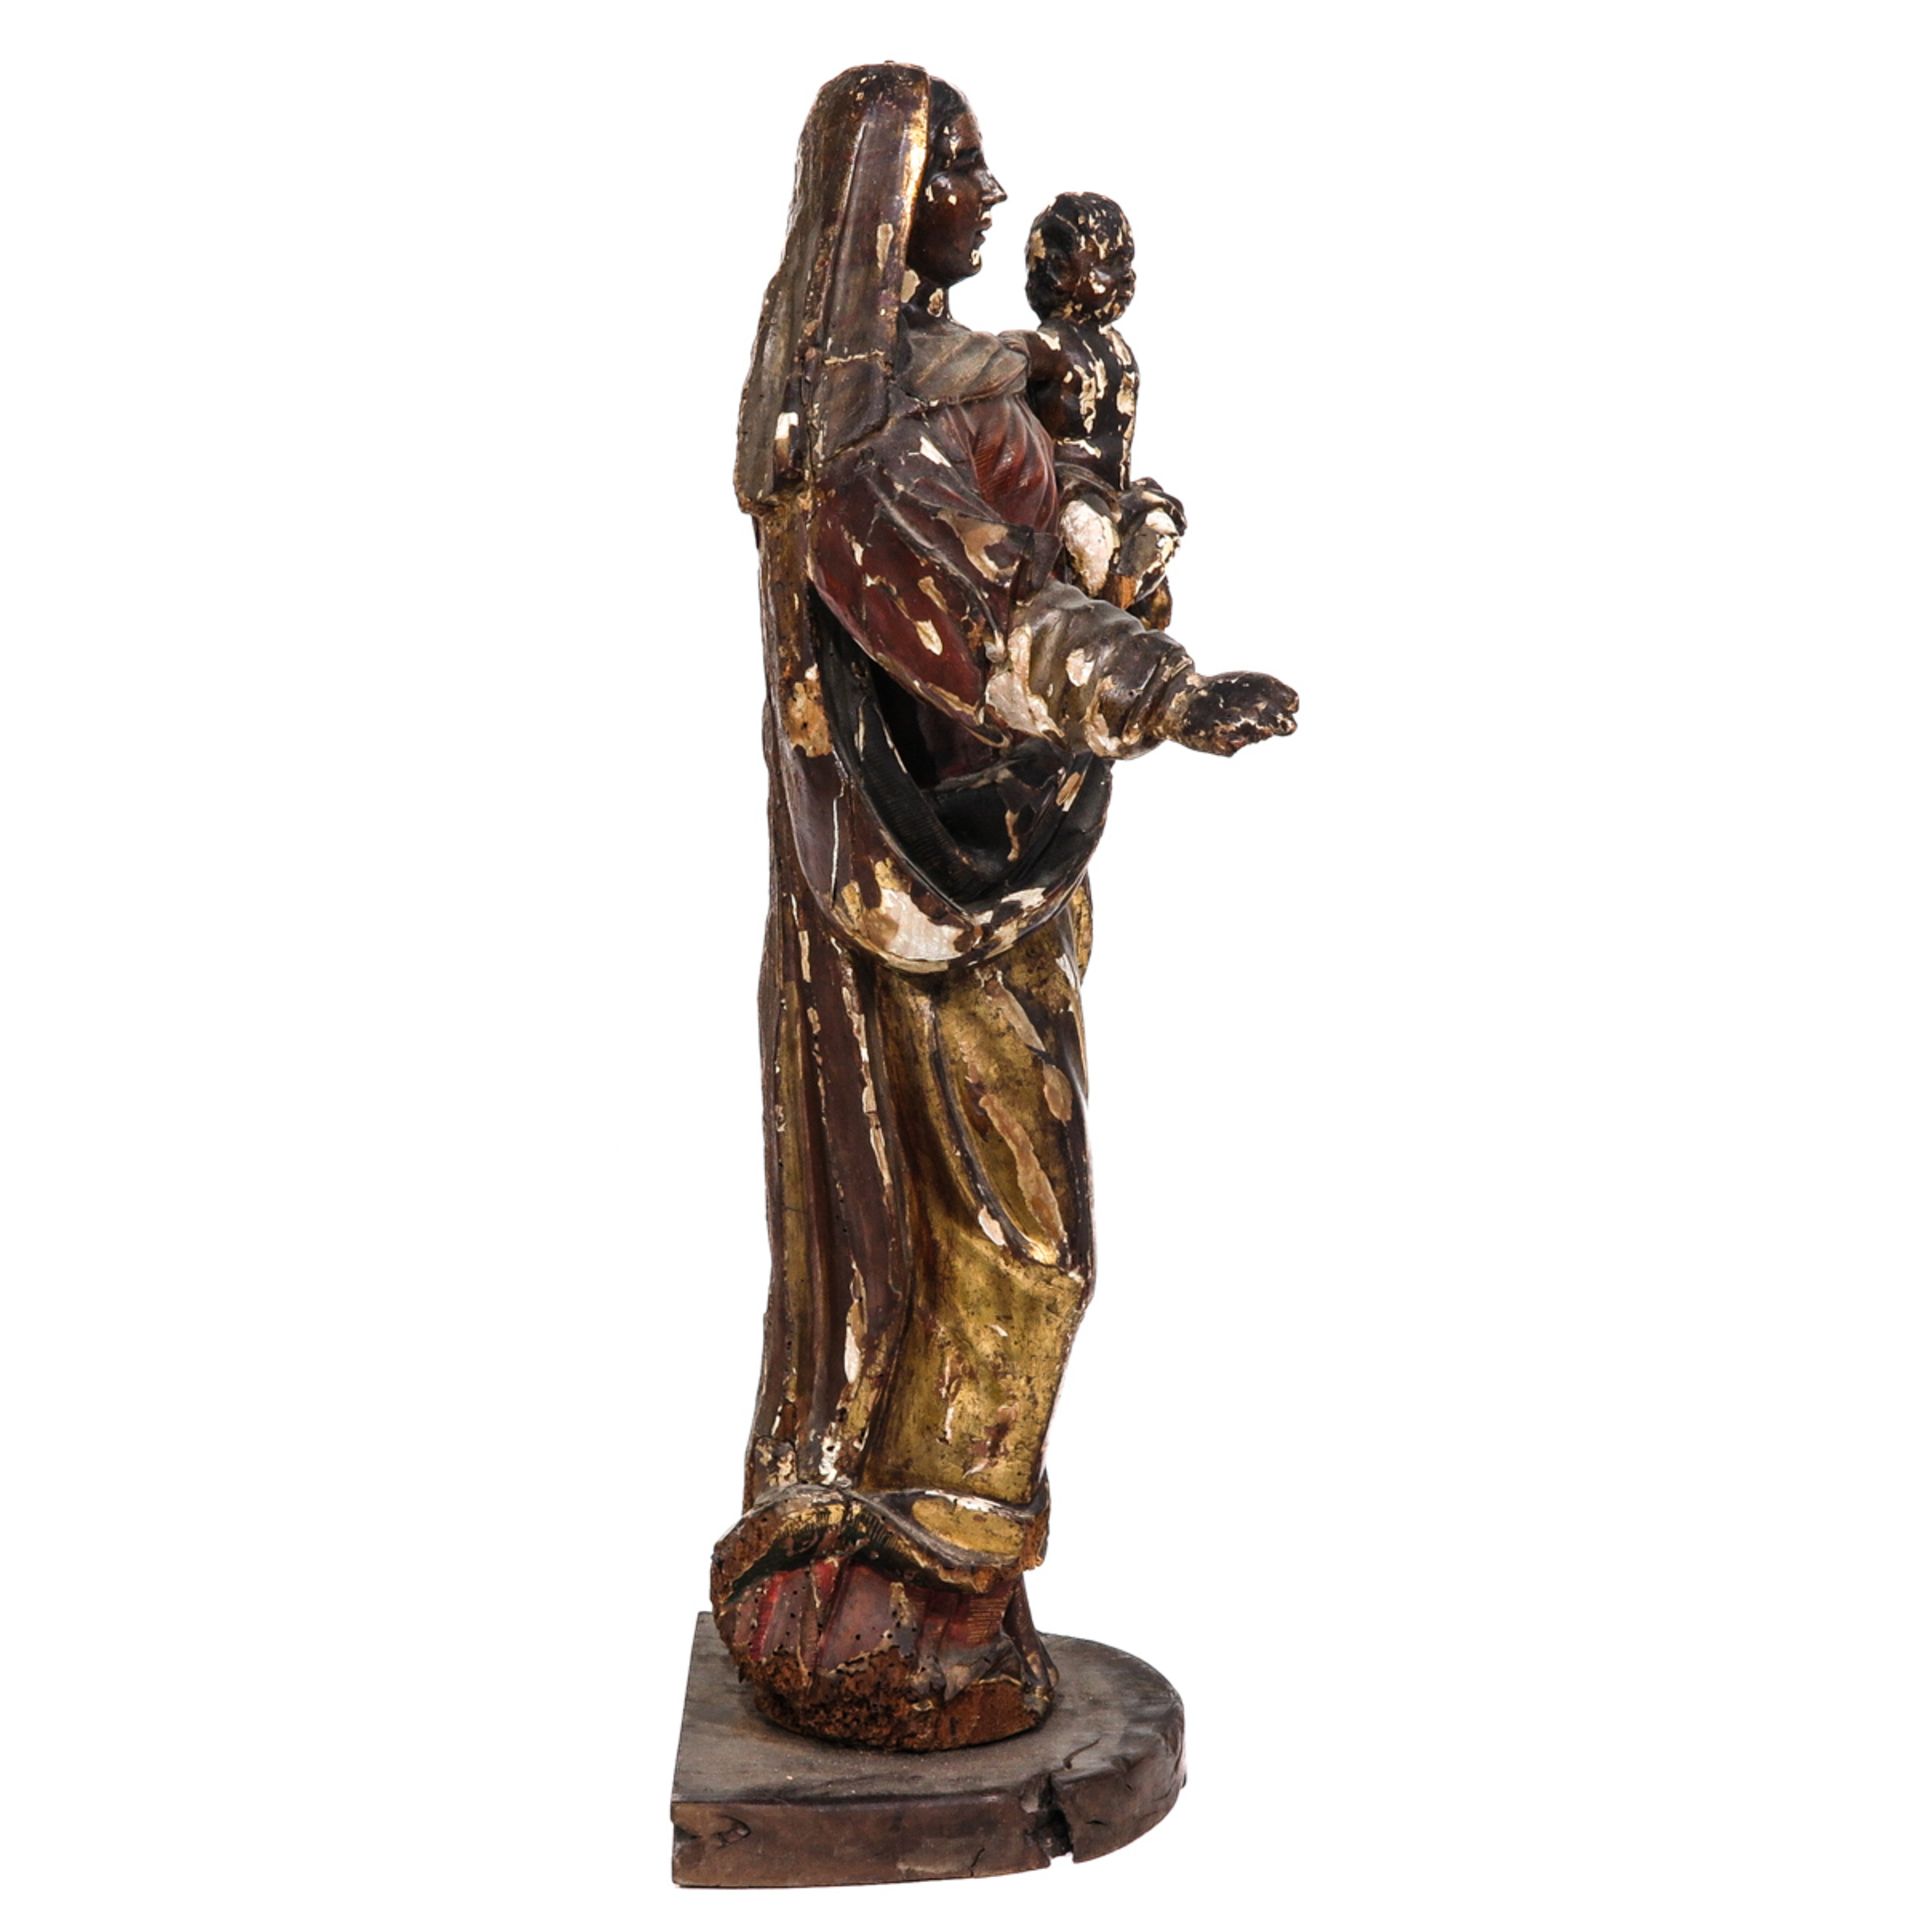 A Wood Sculpture of the Black Madonna - Image 4 of 10